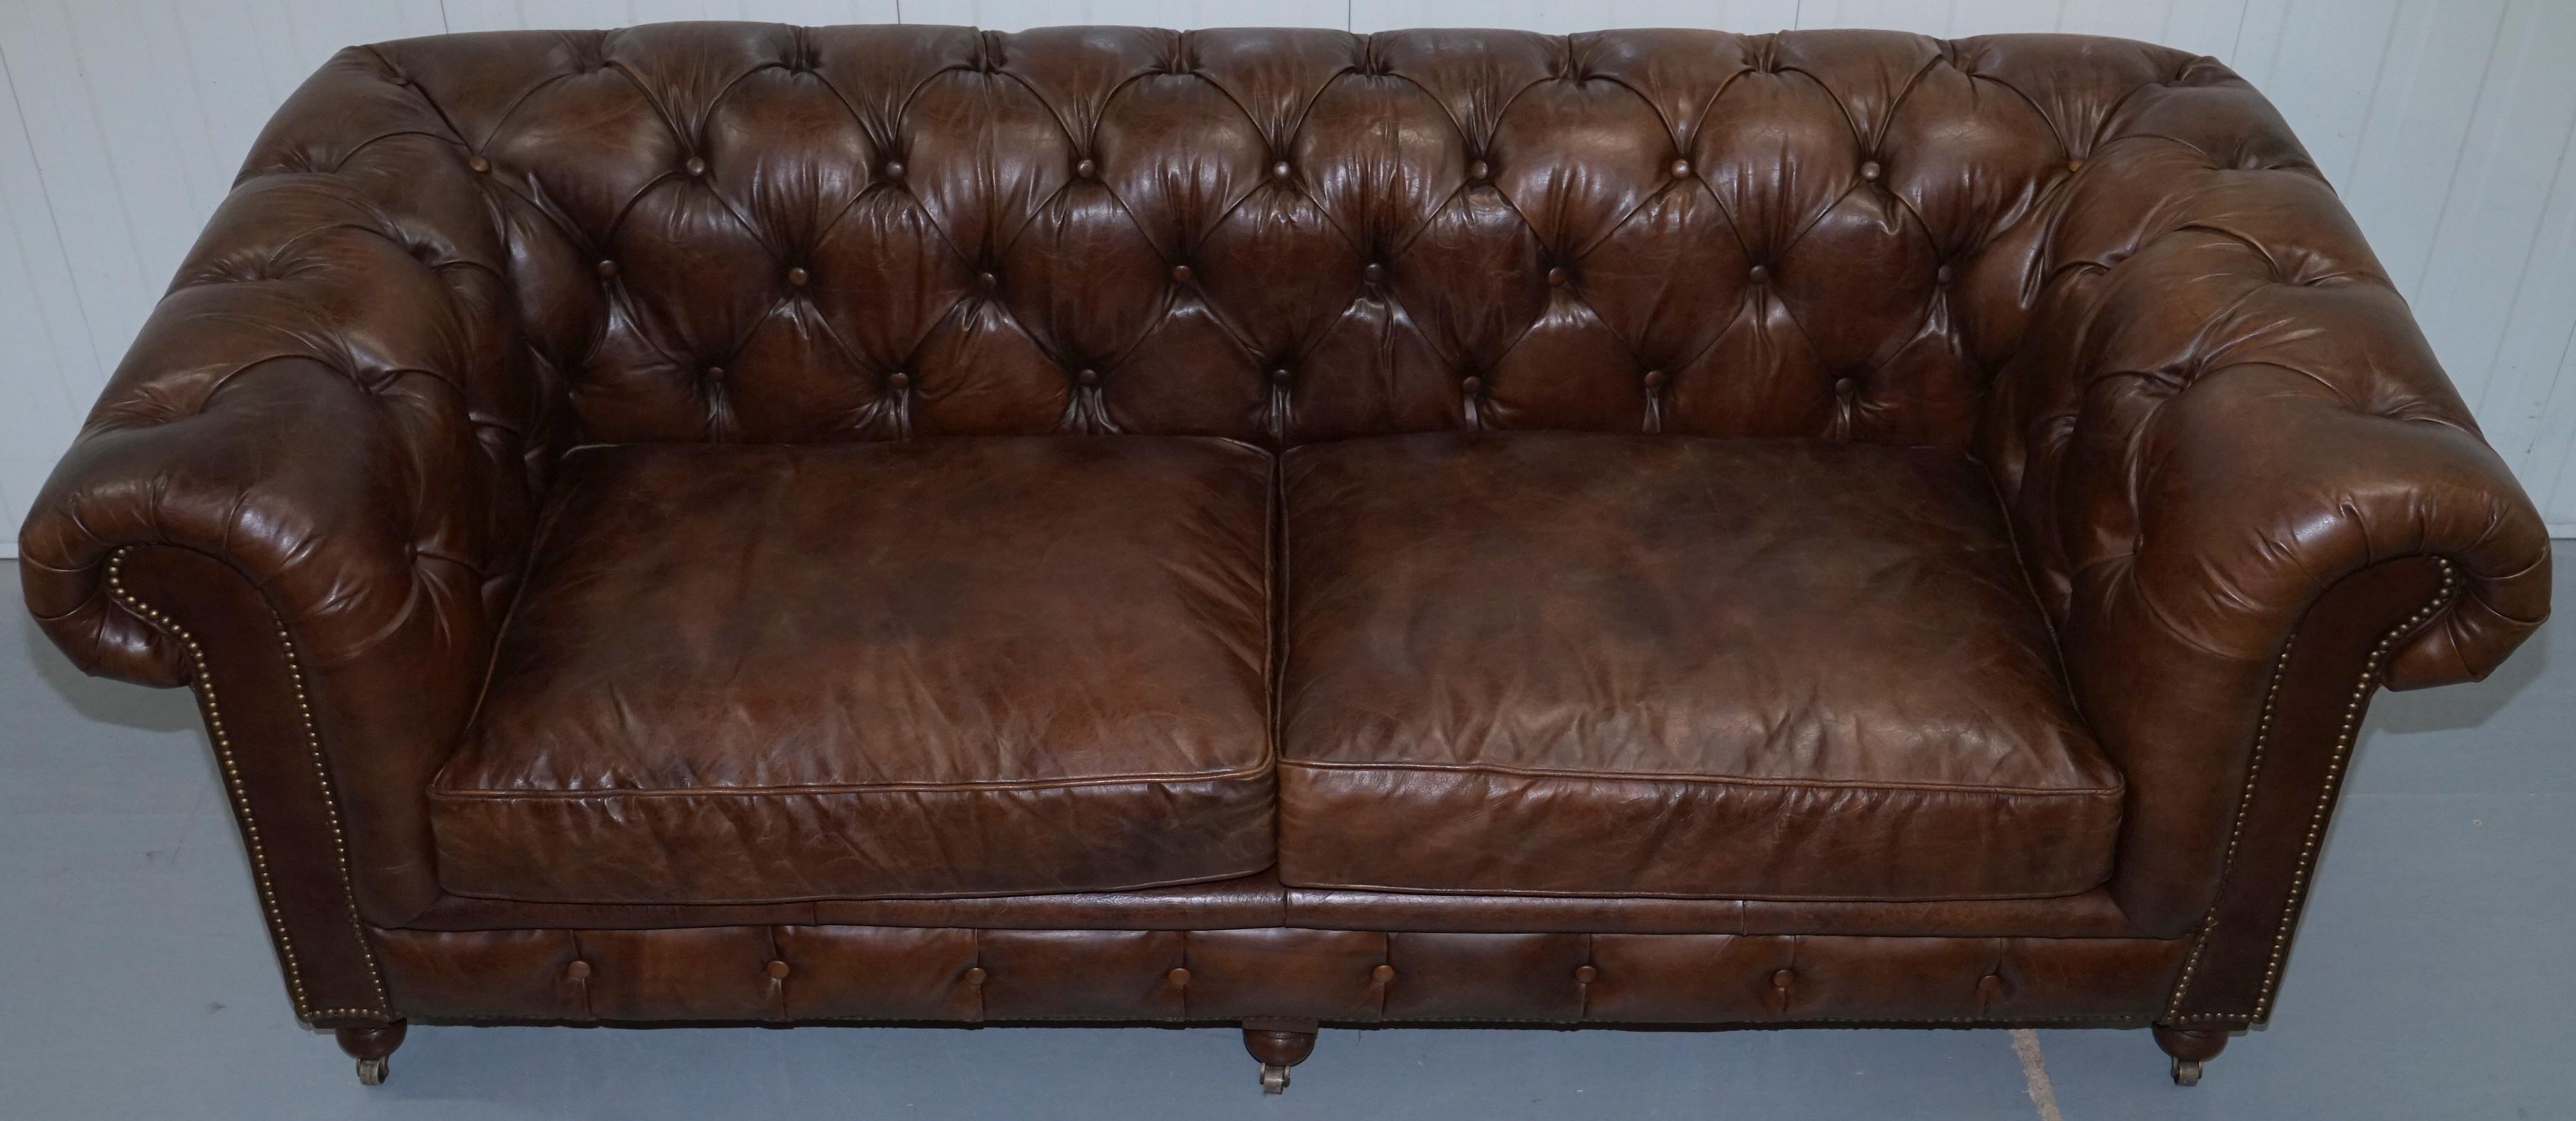 timothy oulton westminster sofa